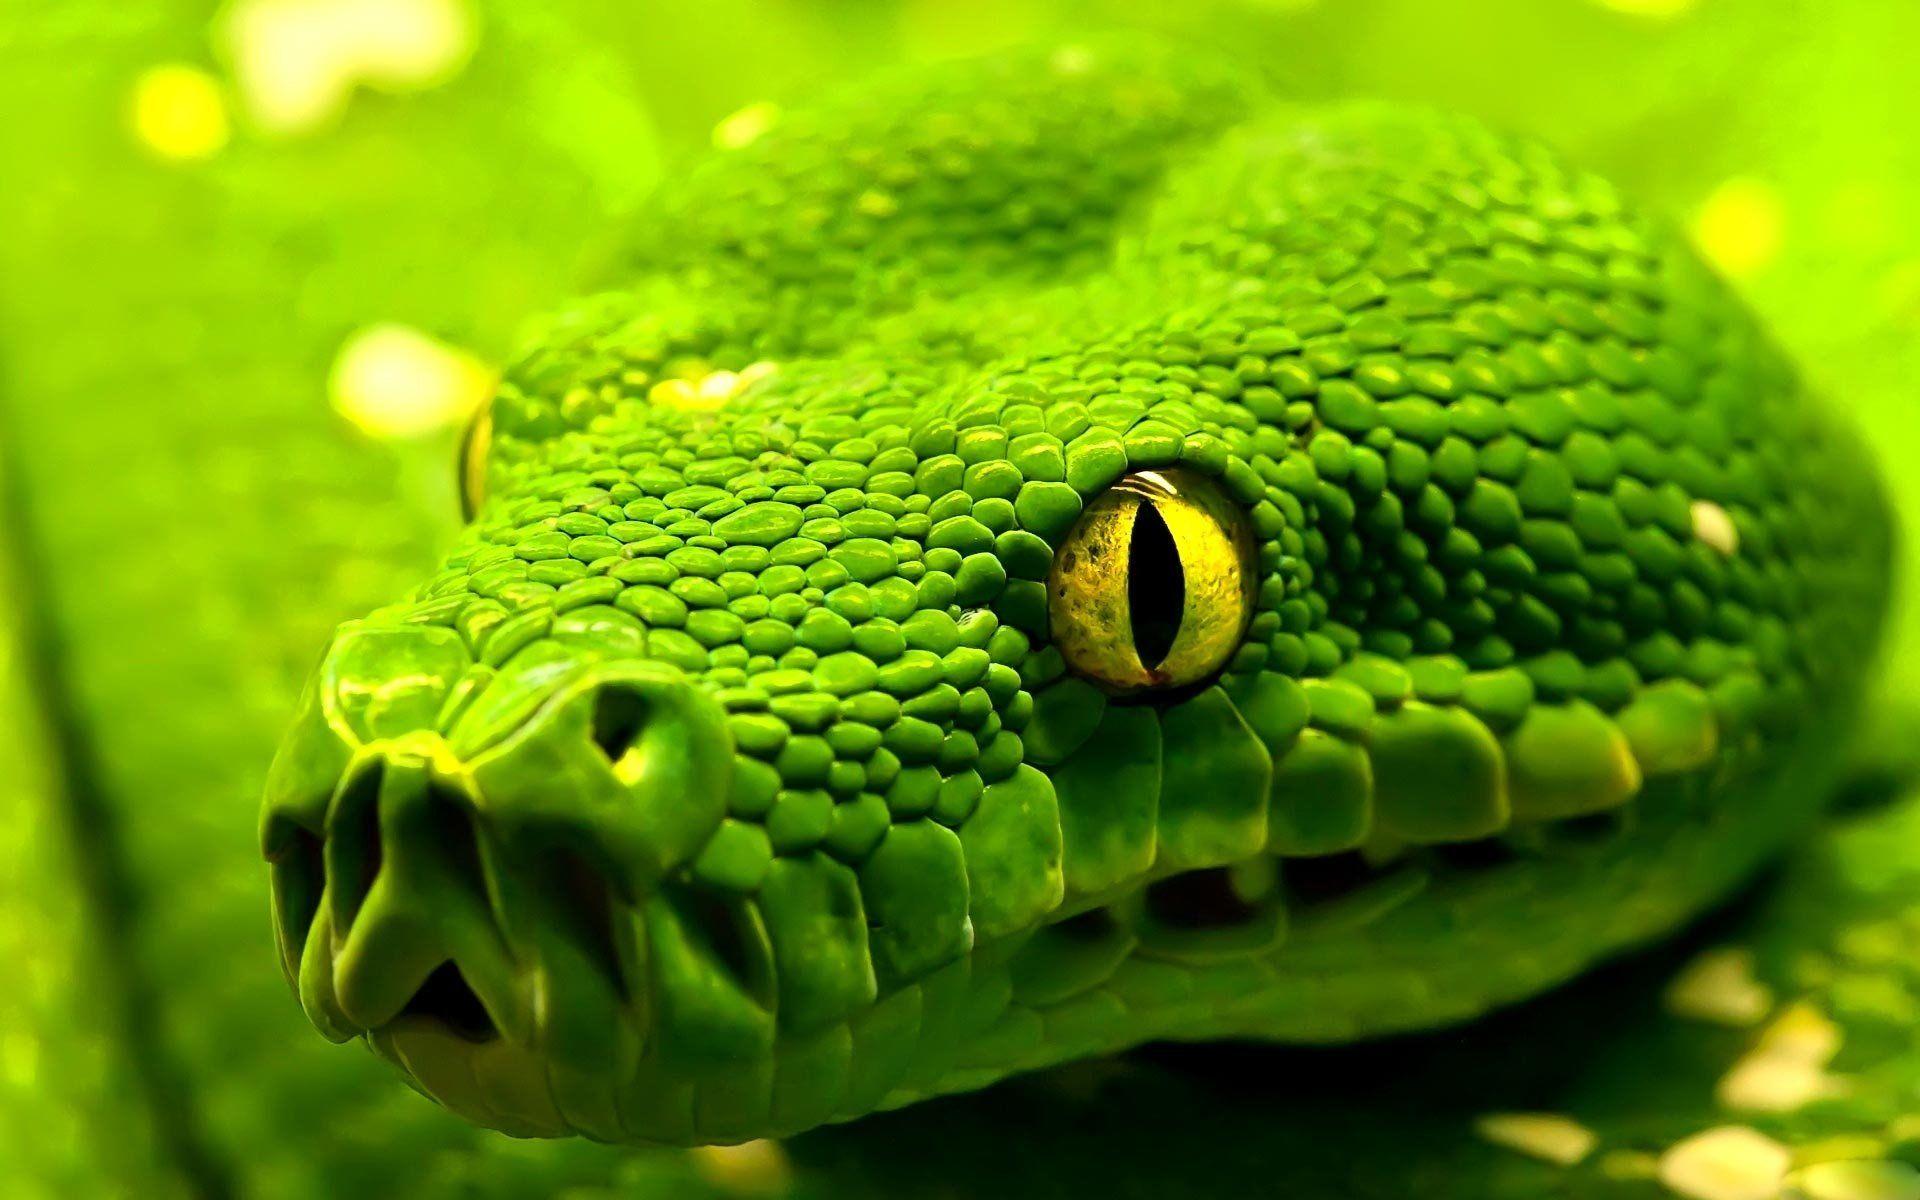 Reptiles Wallpaper and Background Image